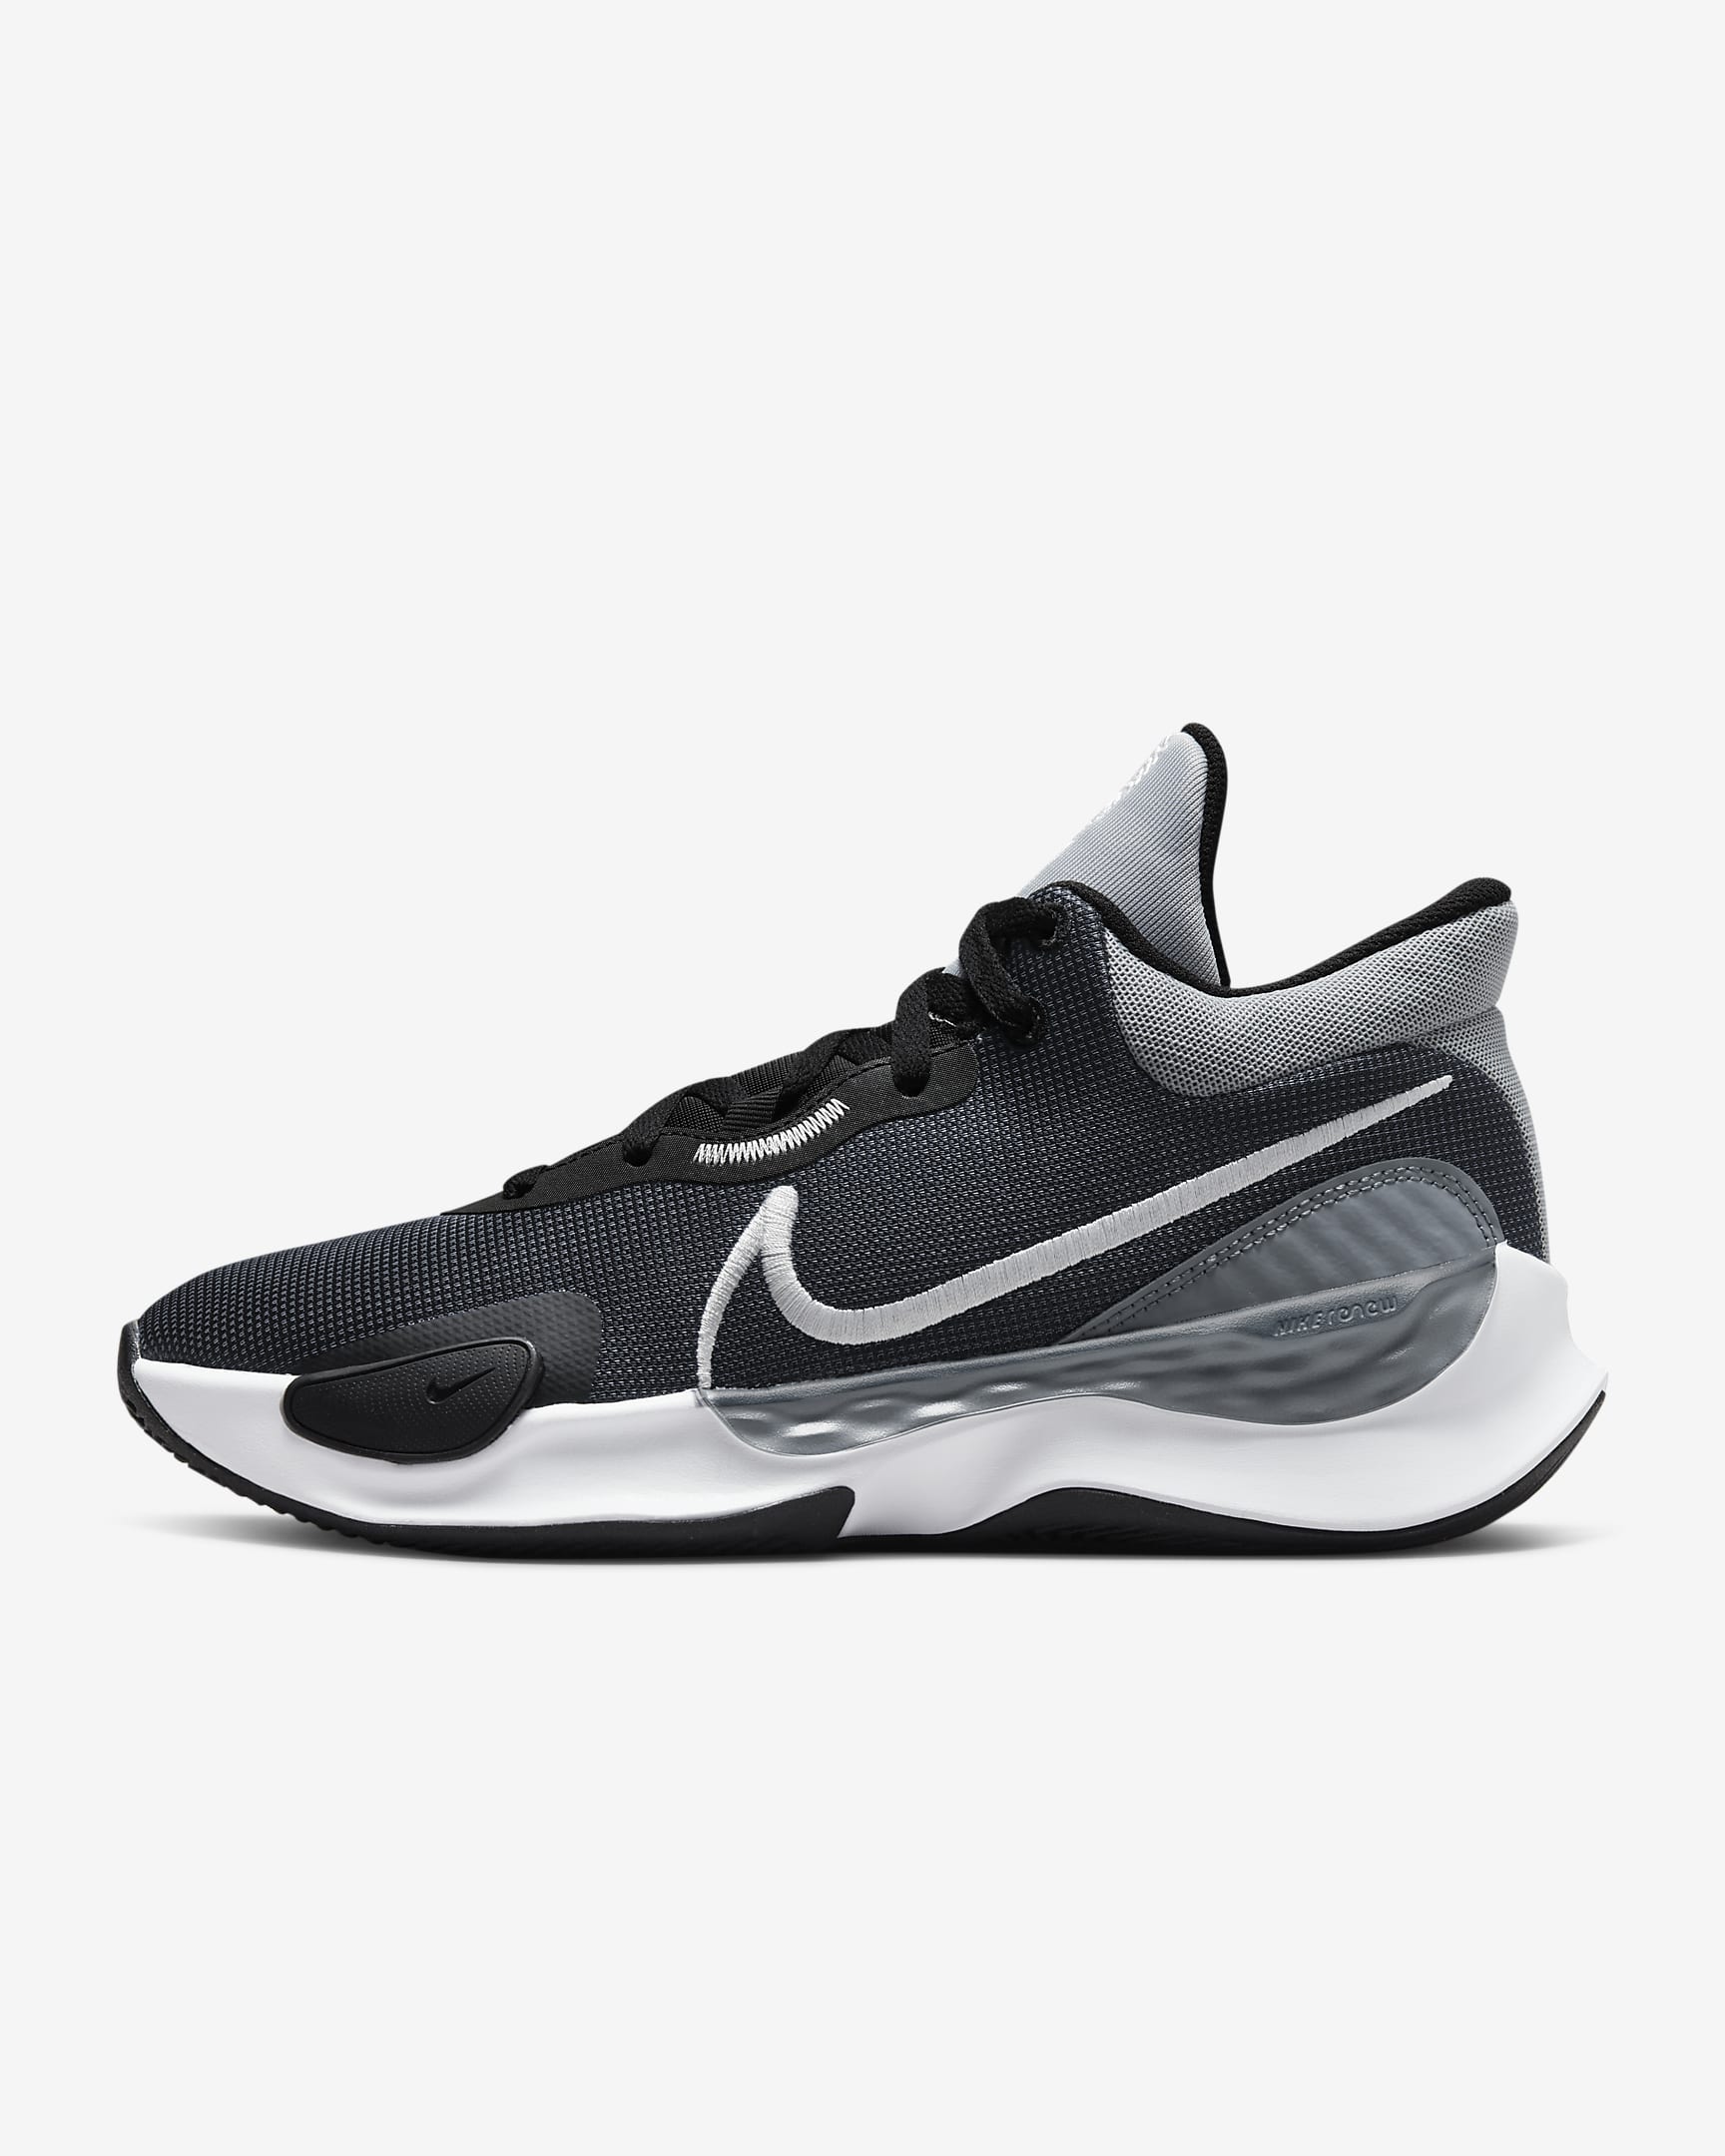 Nike Men's Elevate 3 Basketball Shoes (Black/Wolf Grey) $48.73 + Free Shipping on $50+